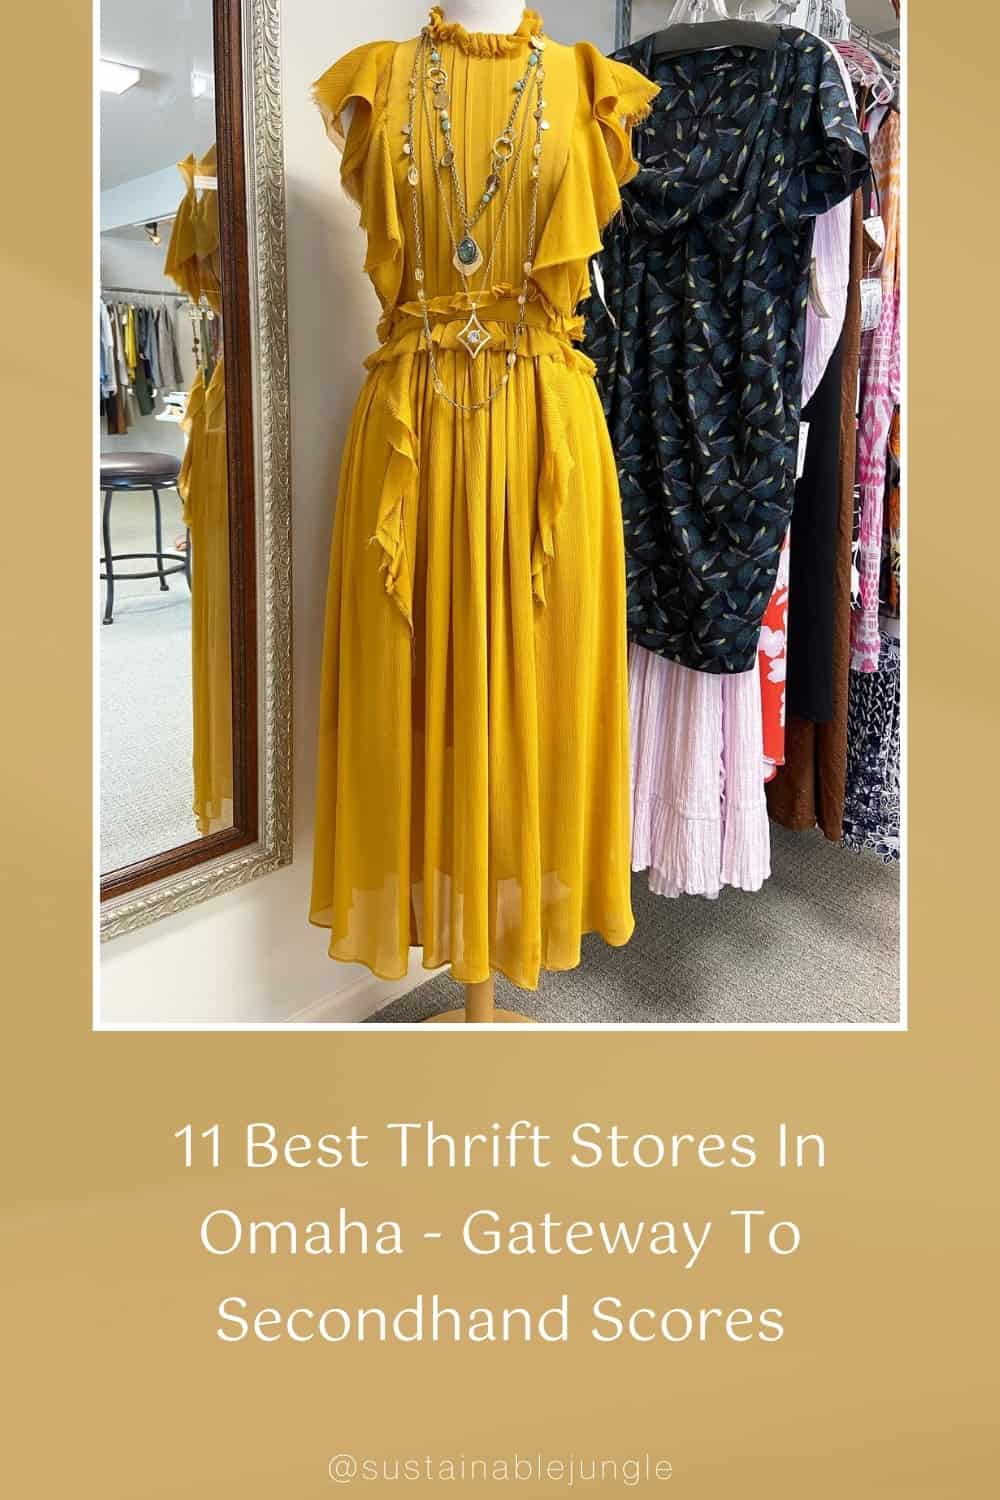 11 Best Thrift Stores In Omaha - Gateway To Secondhand Scores #thriftstoresomaha #bestthriftstoresomaha #clothingthriftstoresomaha #thriftstoresinomaha #bestthriftstoresinomaha #omahathriftstores #furniturethriftstoresomaha #sustainablejungle Image by Esther's Consignment Shop